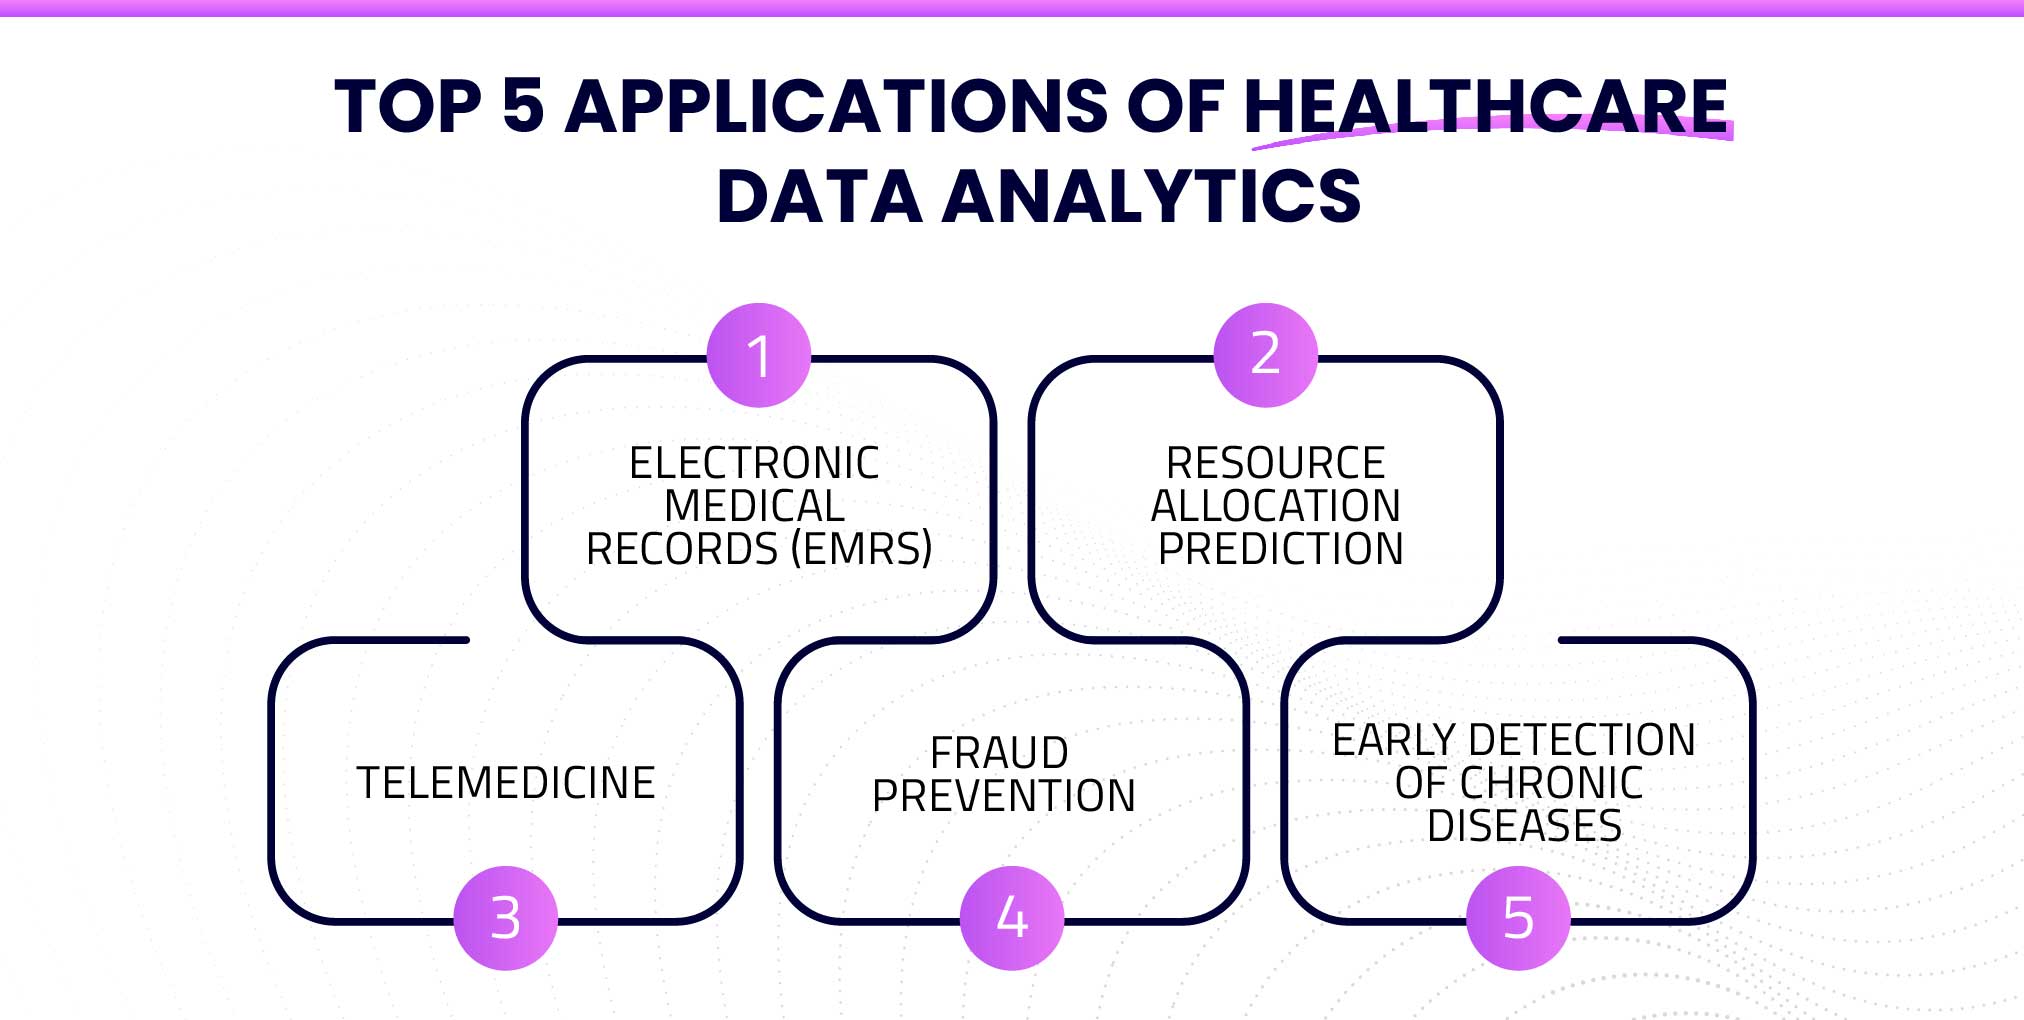 What are the applications of healthcare data analytics?